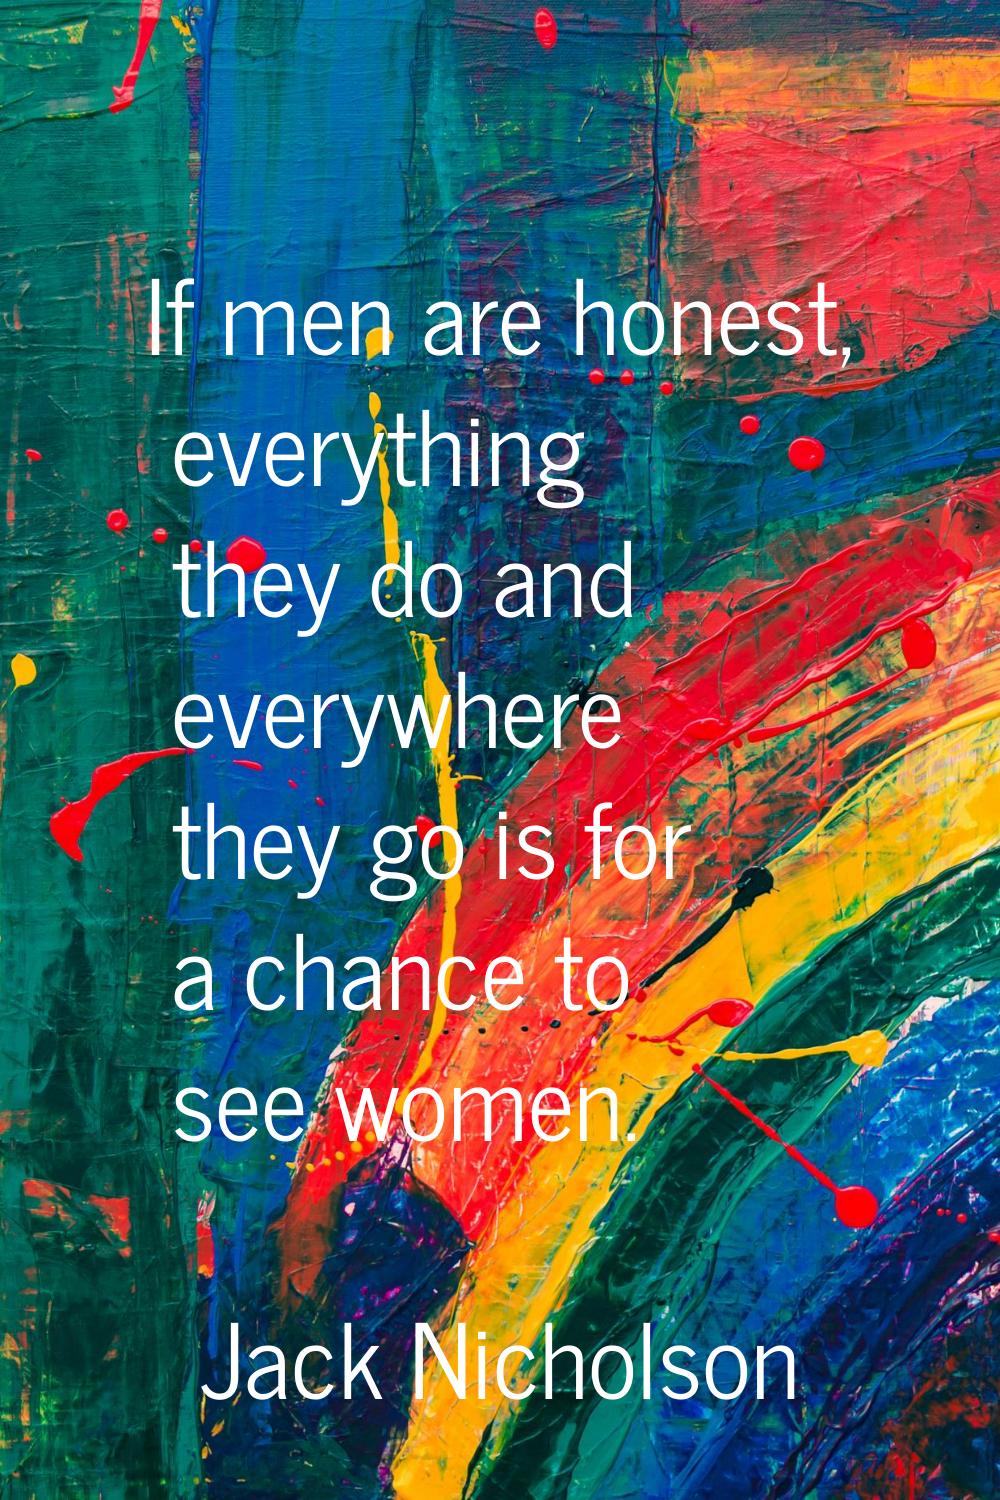 If men are honest, everything they do and everywhere they go is for a chance to see women.